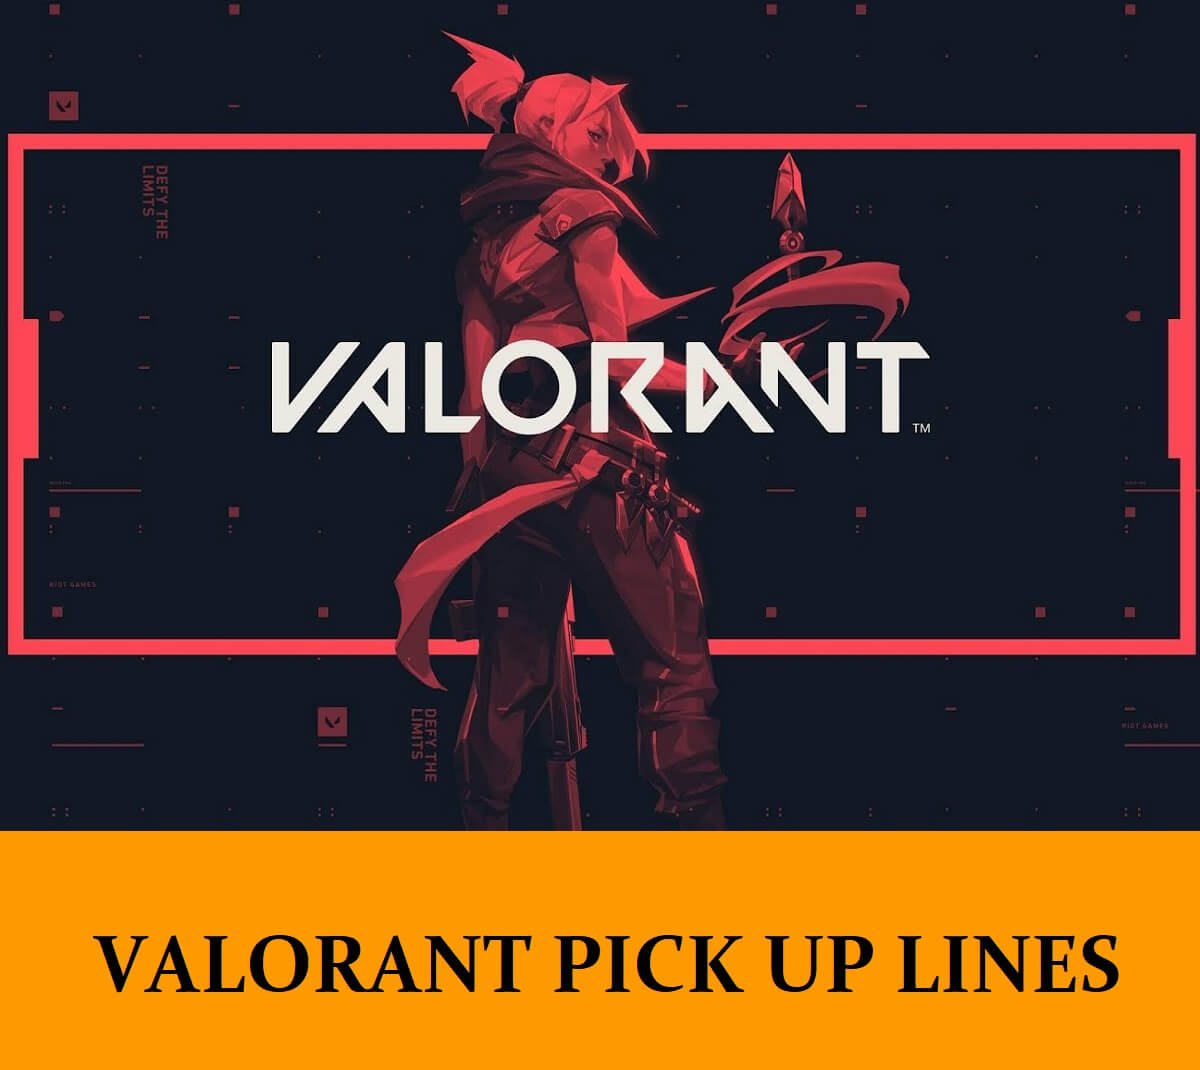 Pick Up Lines About Valorant